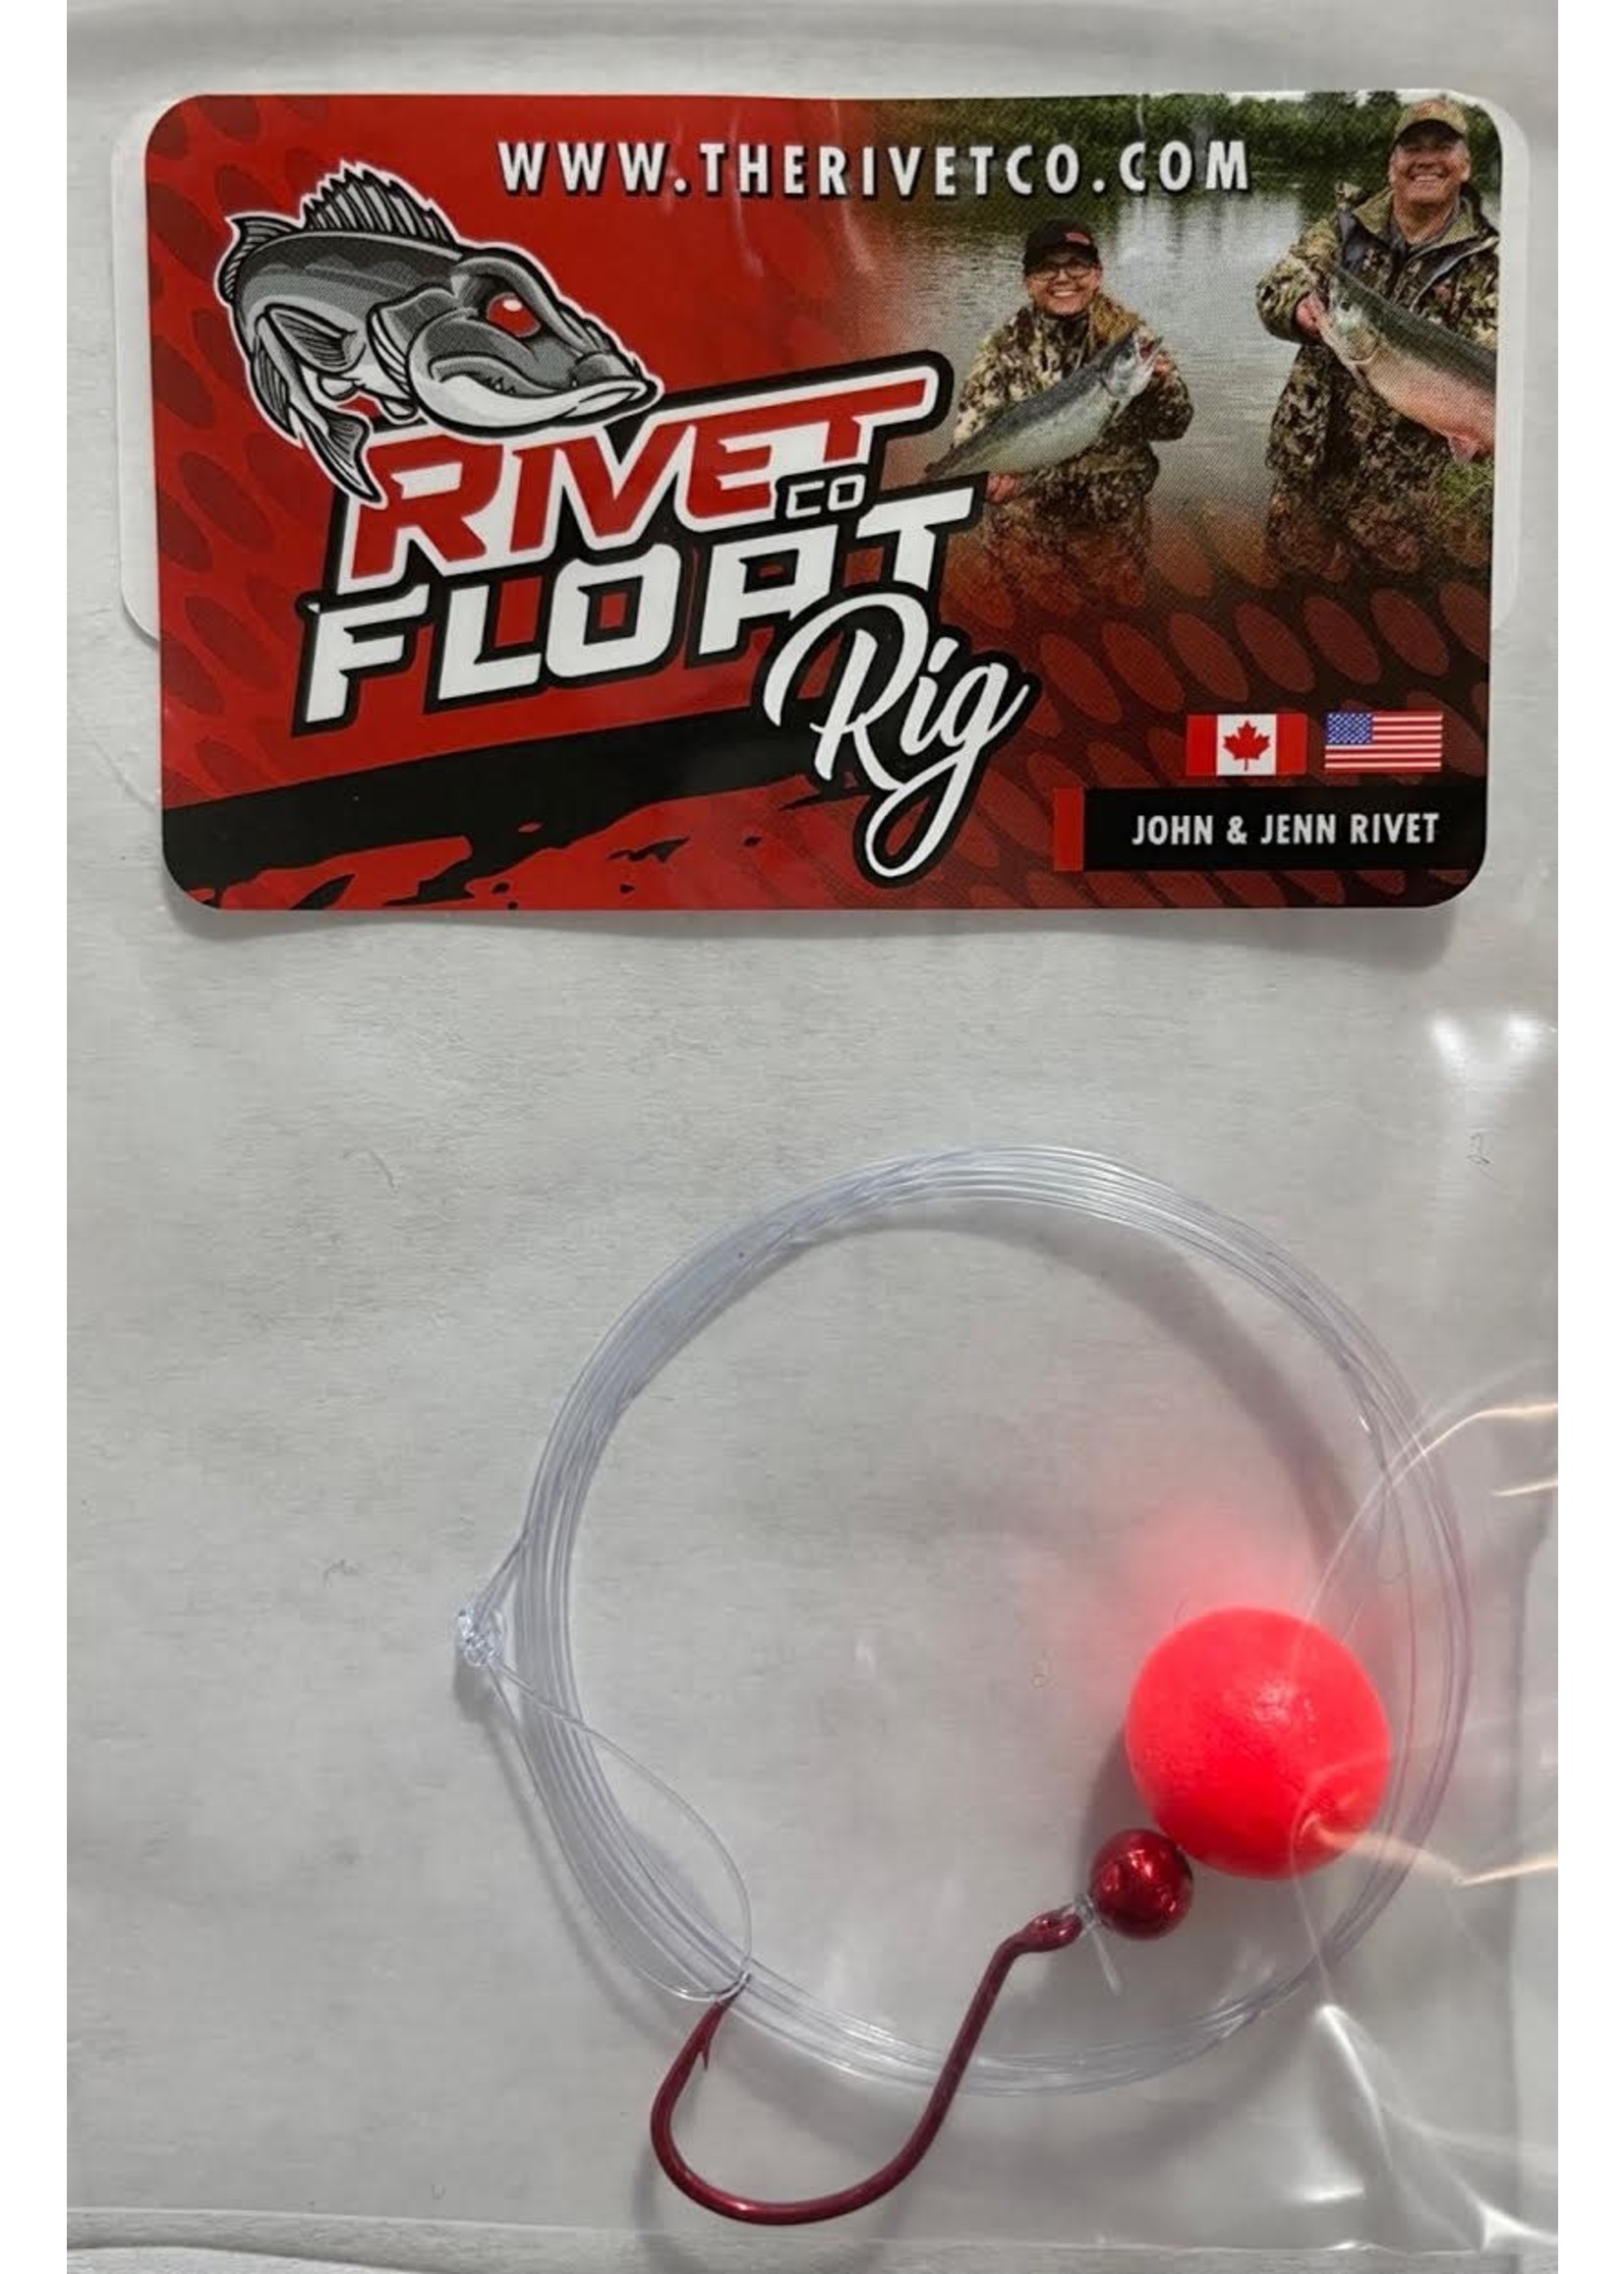 THE RIVET CO THE RIVER CO BALL FLOAT RIG